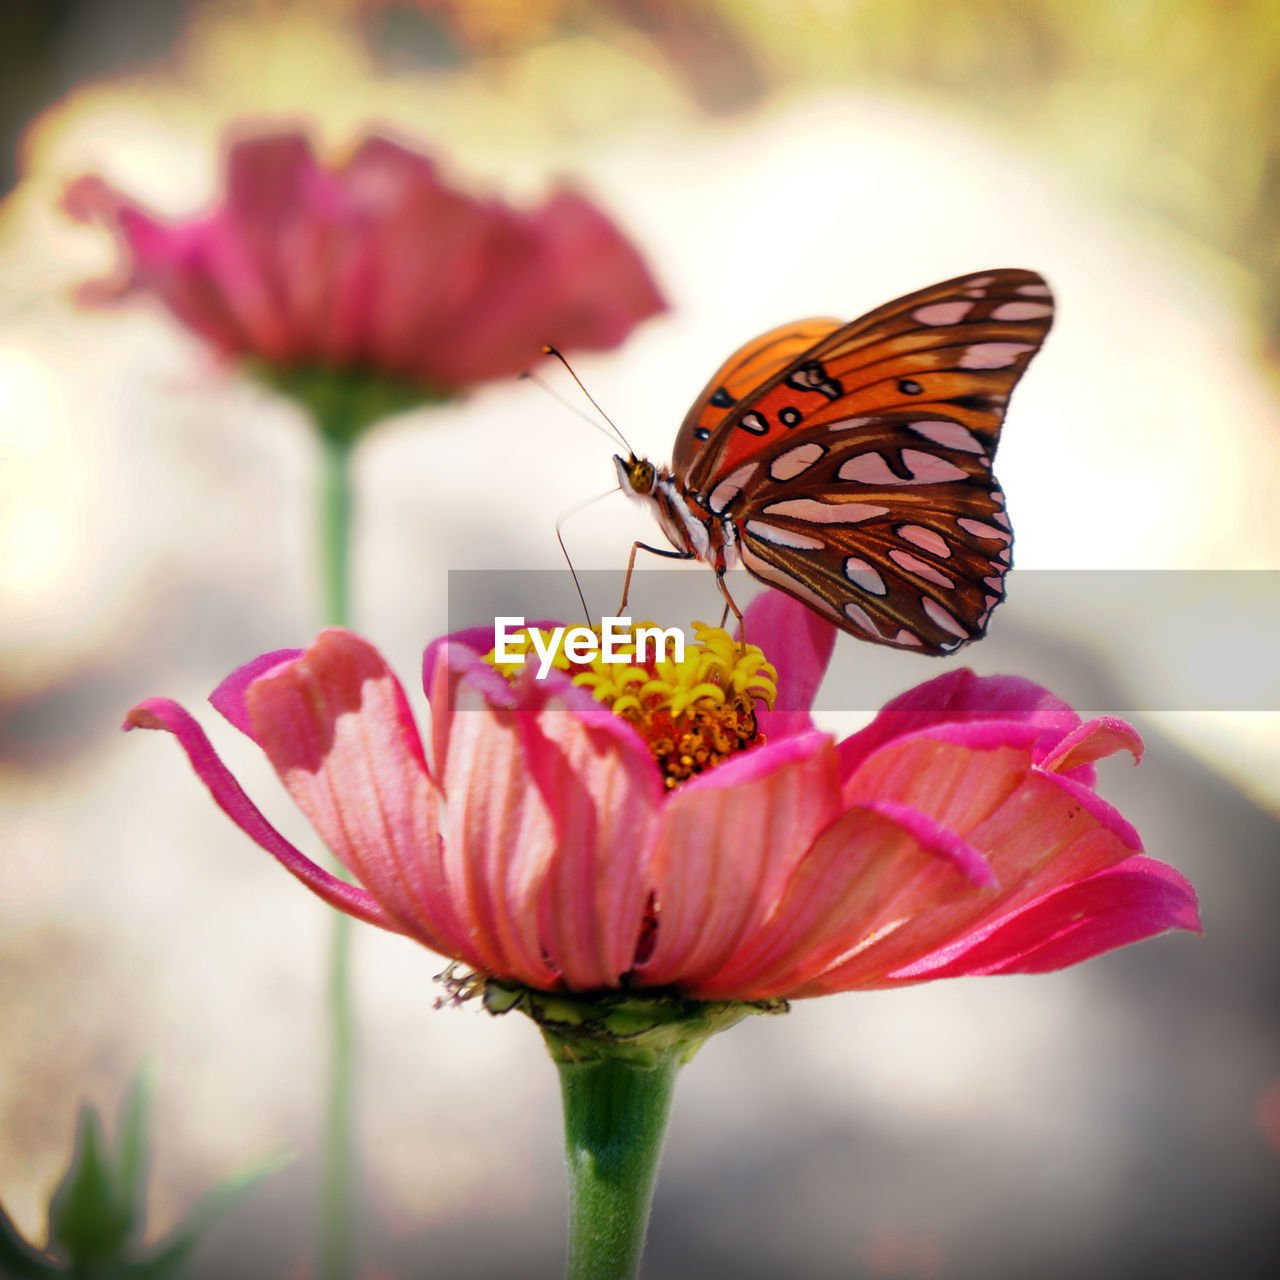 Butterfly on pink flower blooming outdoors